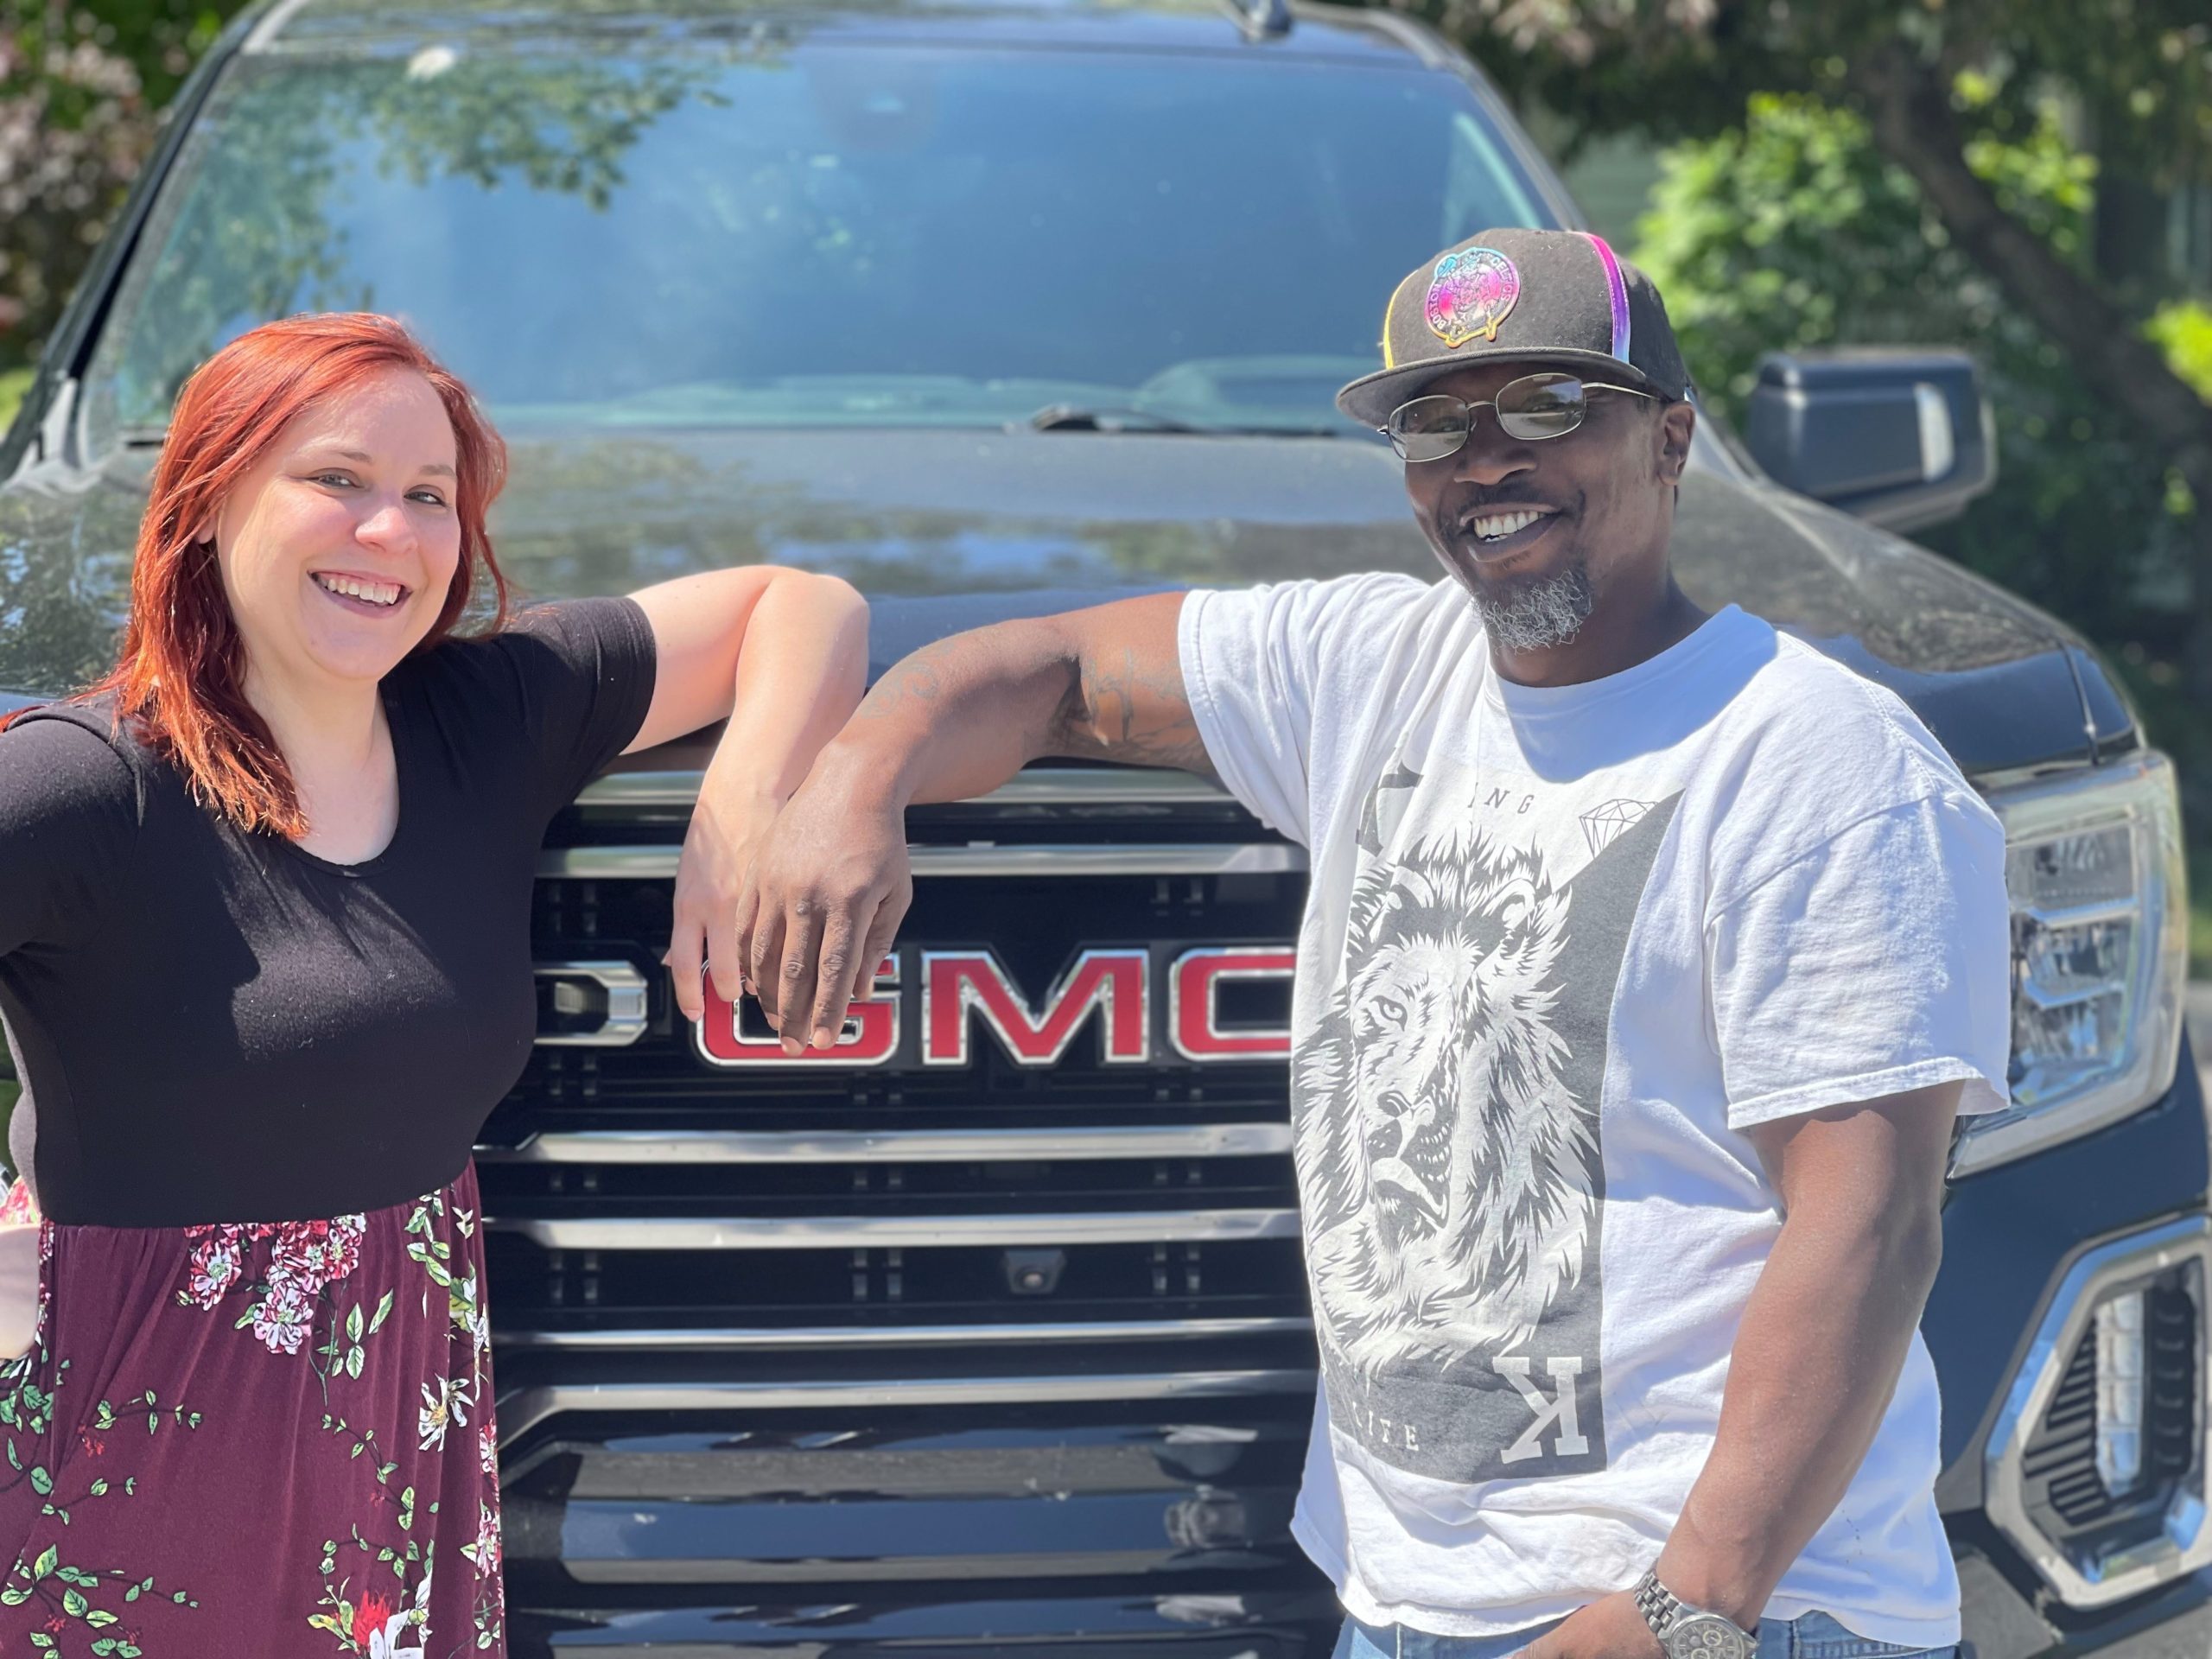 James Watson and Christina Ramsdell look proud in front of a new truck